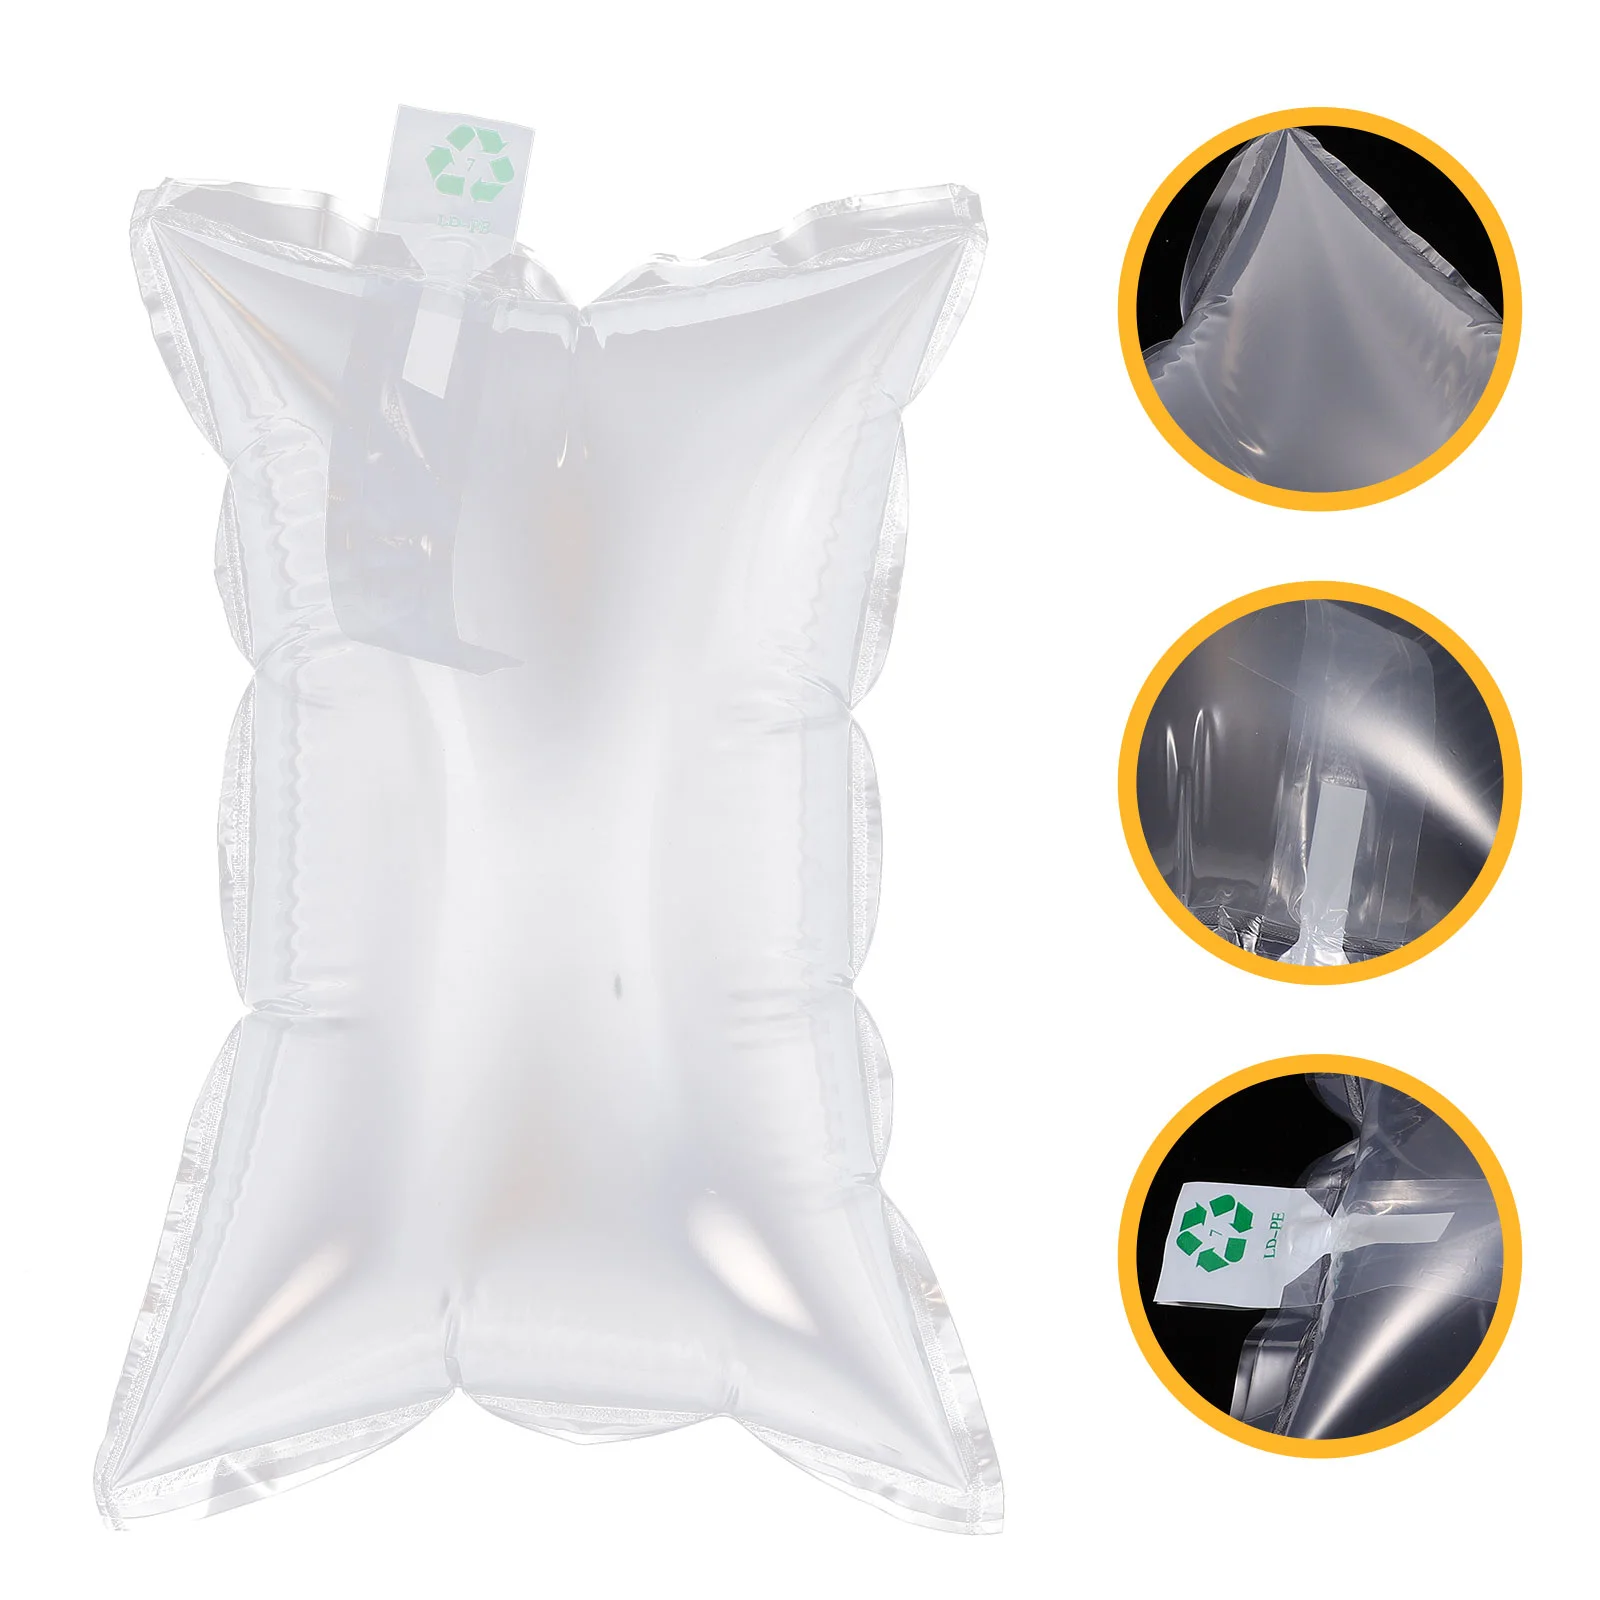 

30 PCS Filling Bag Envelopes Bubble Inflatable Laptop Mailer 9-layer Co-extrusion Pa Blocking Wrap Packaging